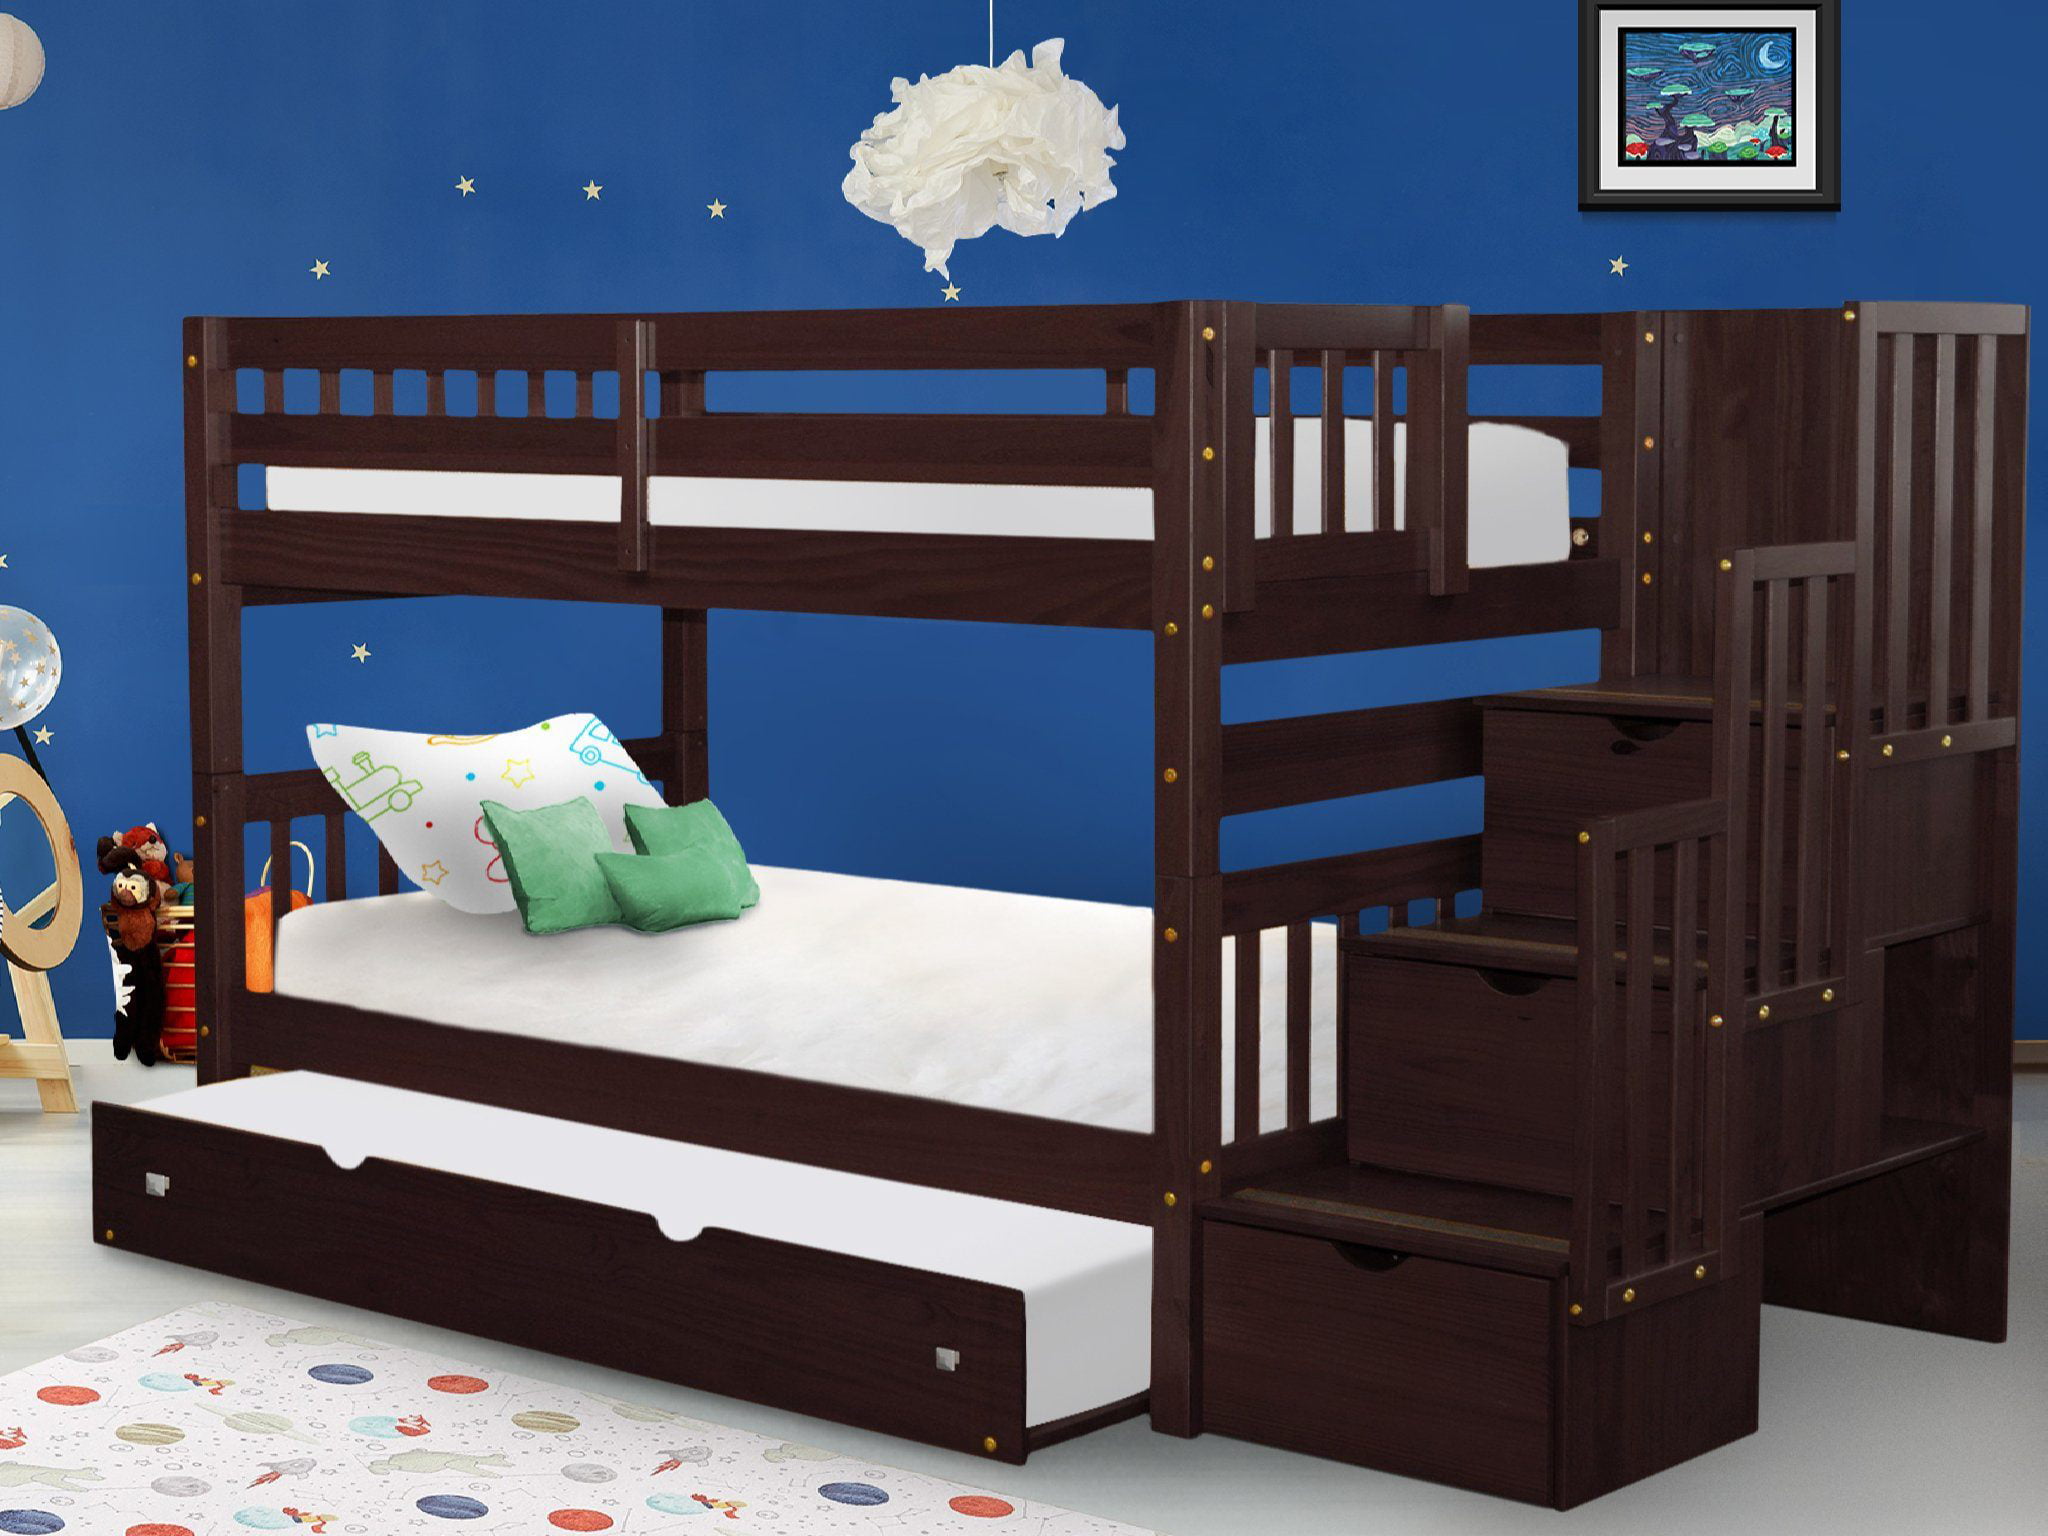 Bedz King Stairway Bunk Beds Twin Over, Wooden Bunk Bed With Stairs And Trundle